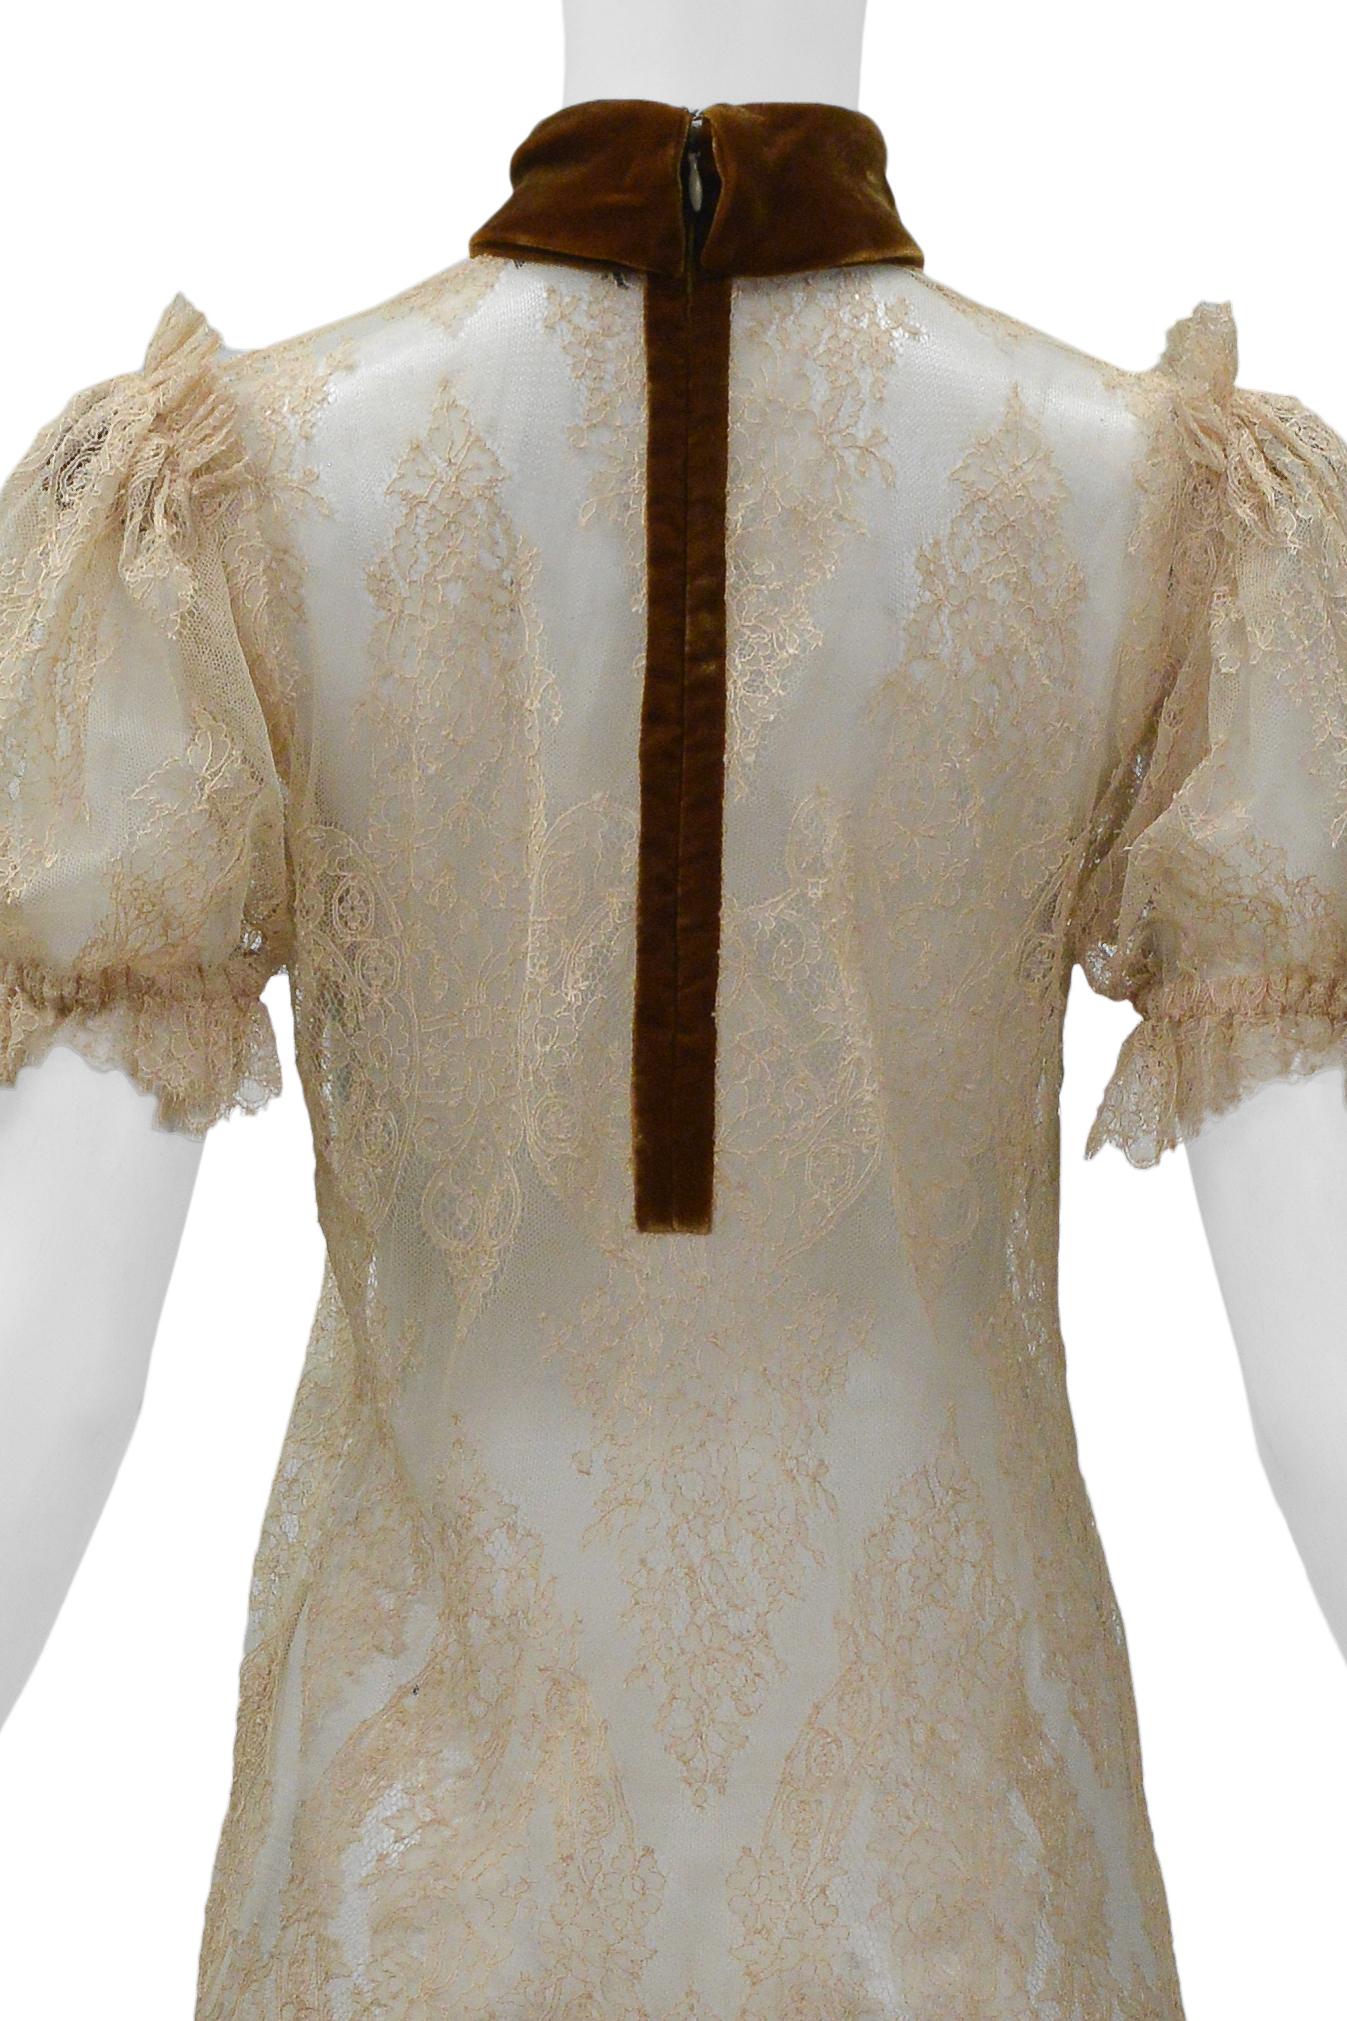 Dolce & Gabbana Off White Lace Mini Dress With Velvet Collar 2001 For Sale 3